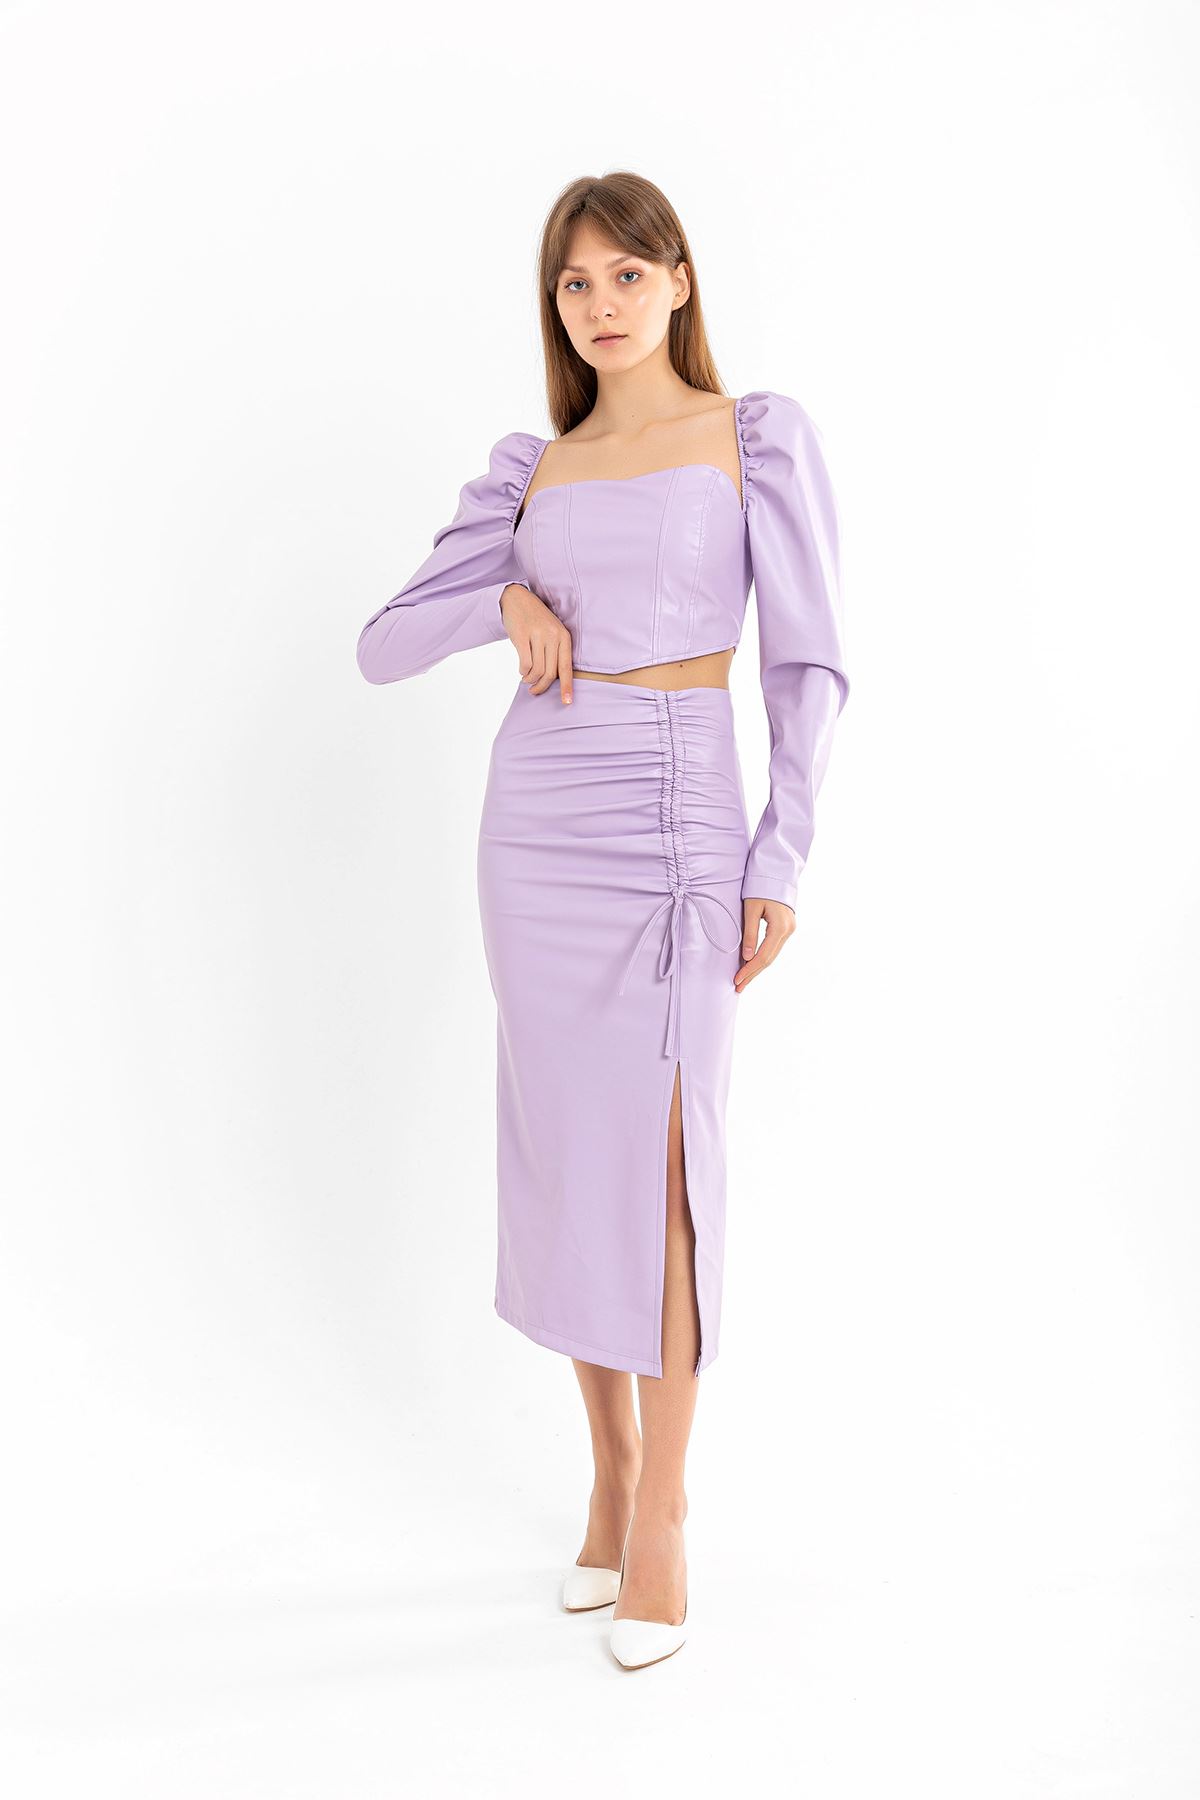 Leather Fabric Above Knee Shirred Slit Women'S Skirt - Lilac